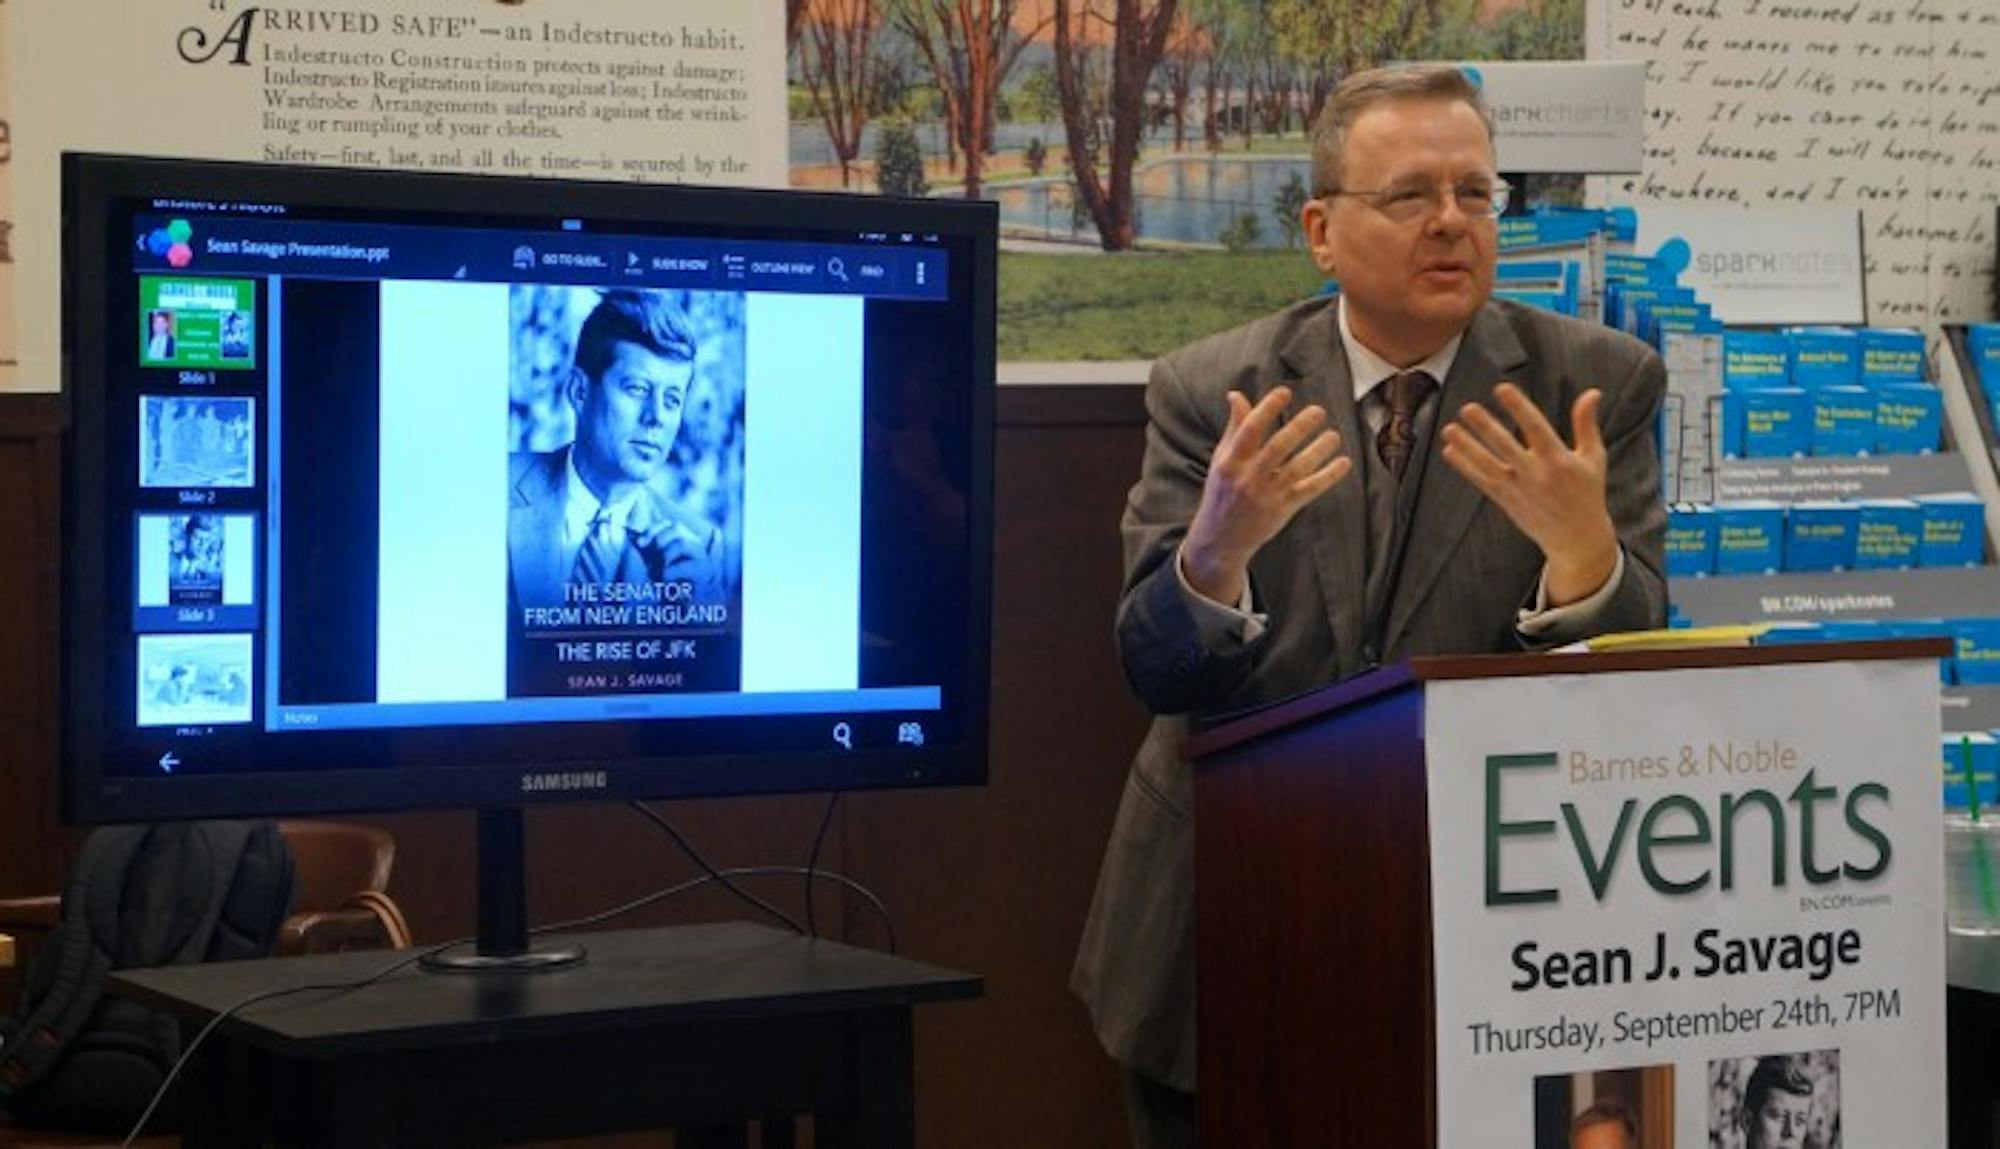 Saint Mary’s professor of political science Sean Savage speaks about his new book focusing on the life and political career of John F. Kennedy on Thursday at the Barnes and Noble in University Park Mall.